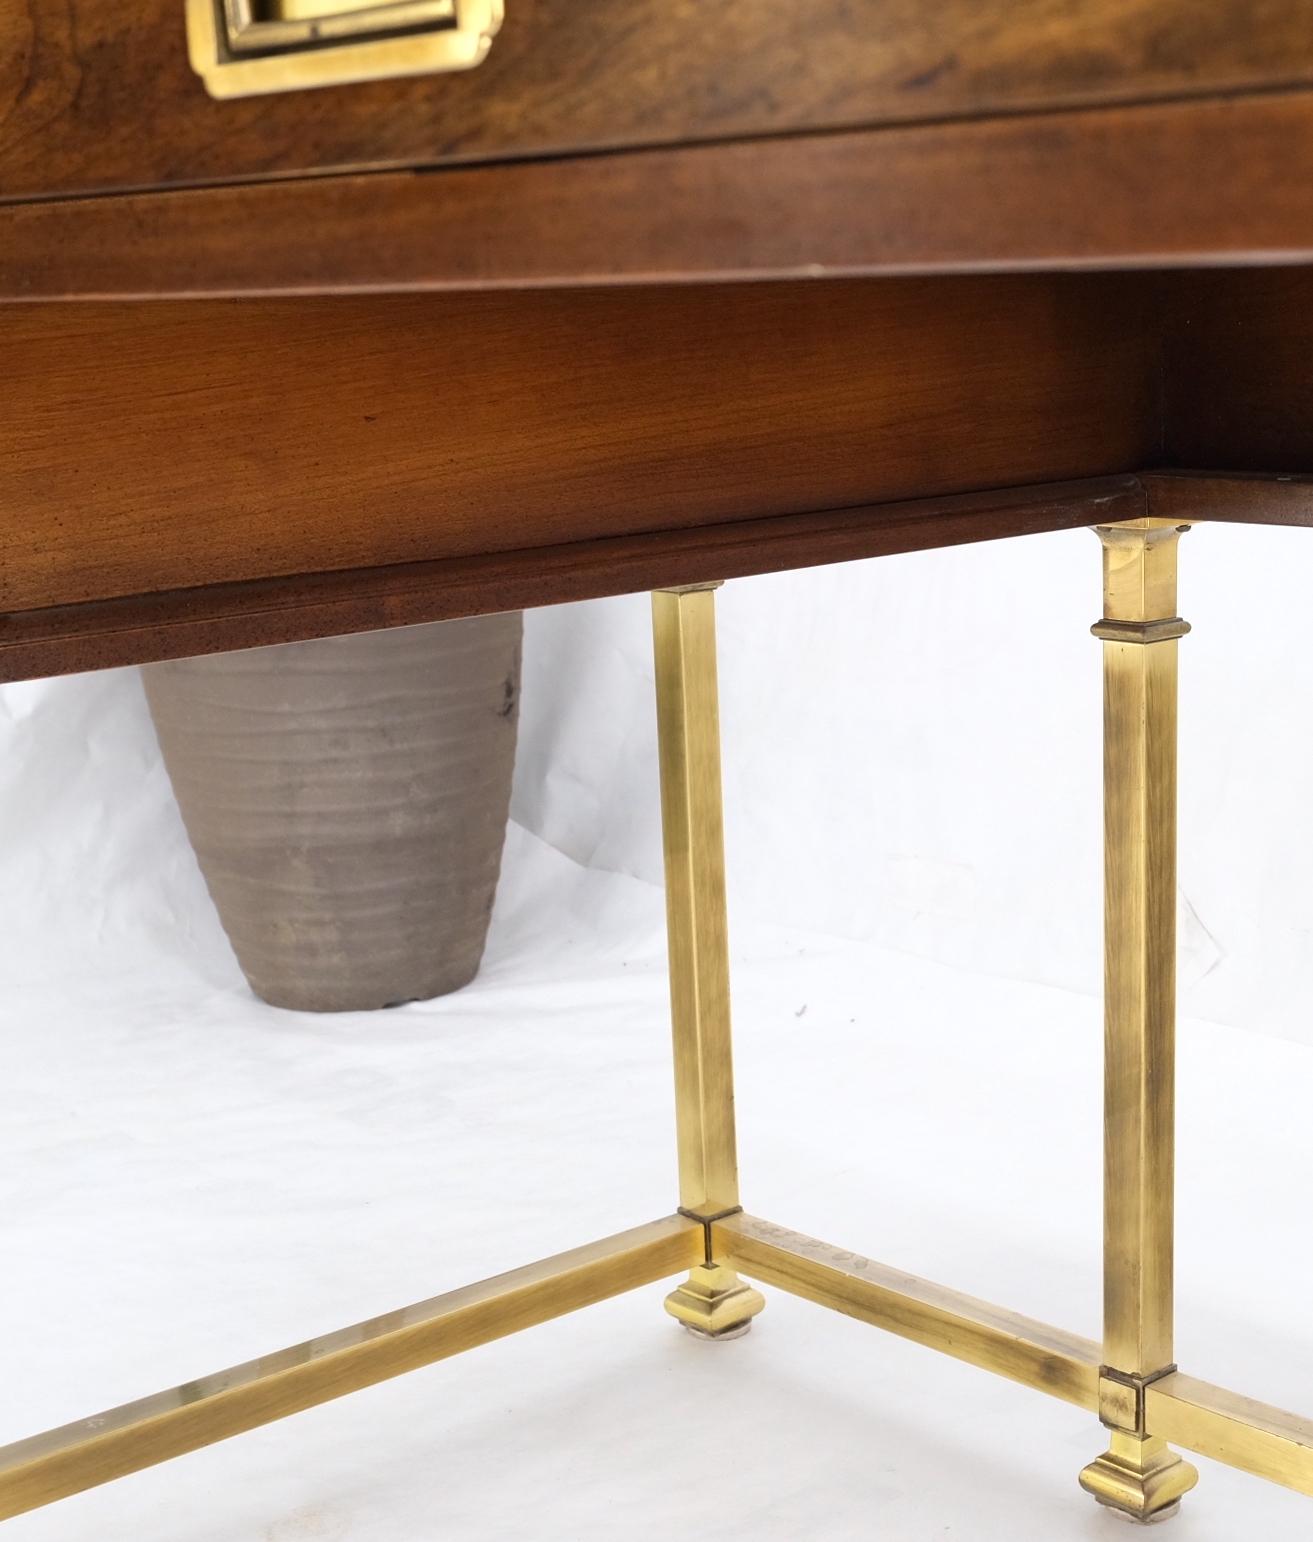 Brass Base Leather Tooled Top Campaign Style Desk by Slight Mint 2